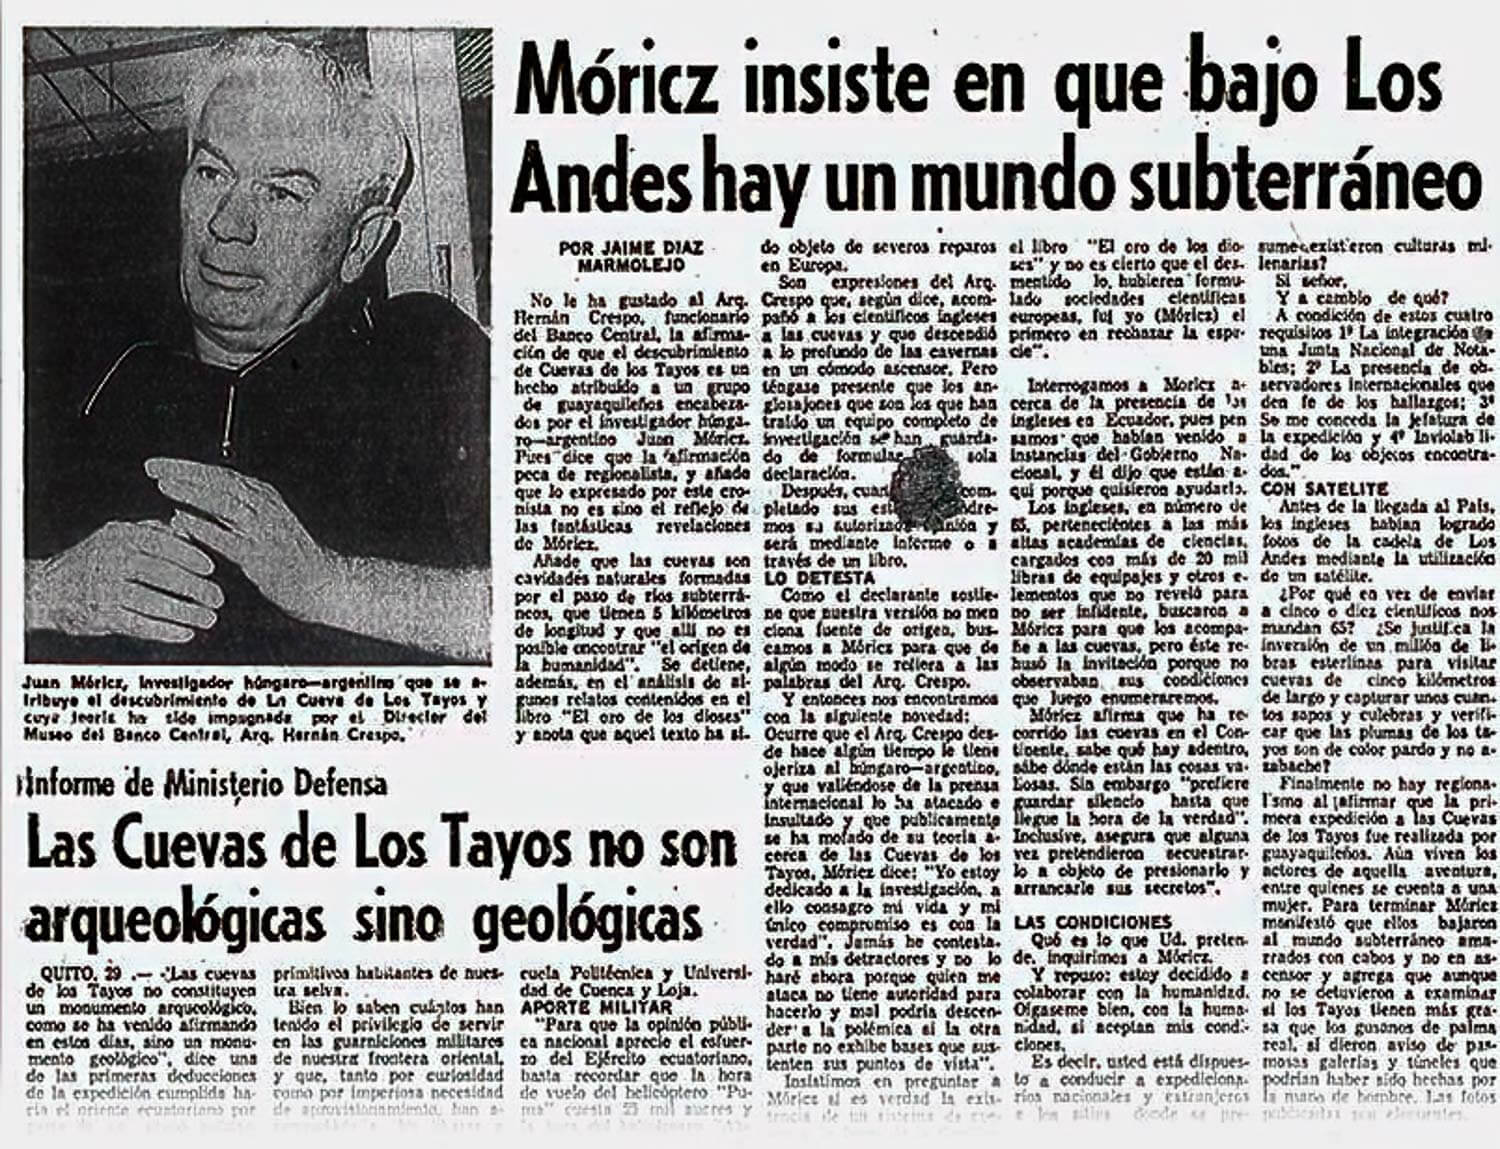 Móricz on a newspaper about the existence of a subterranean underworld